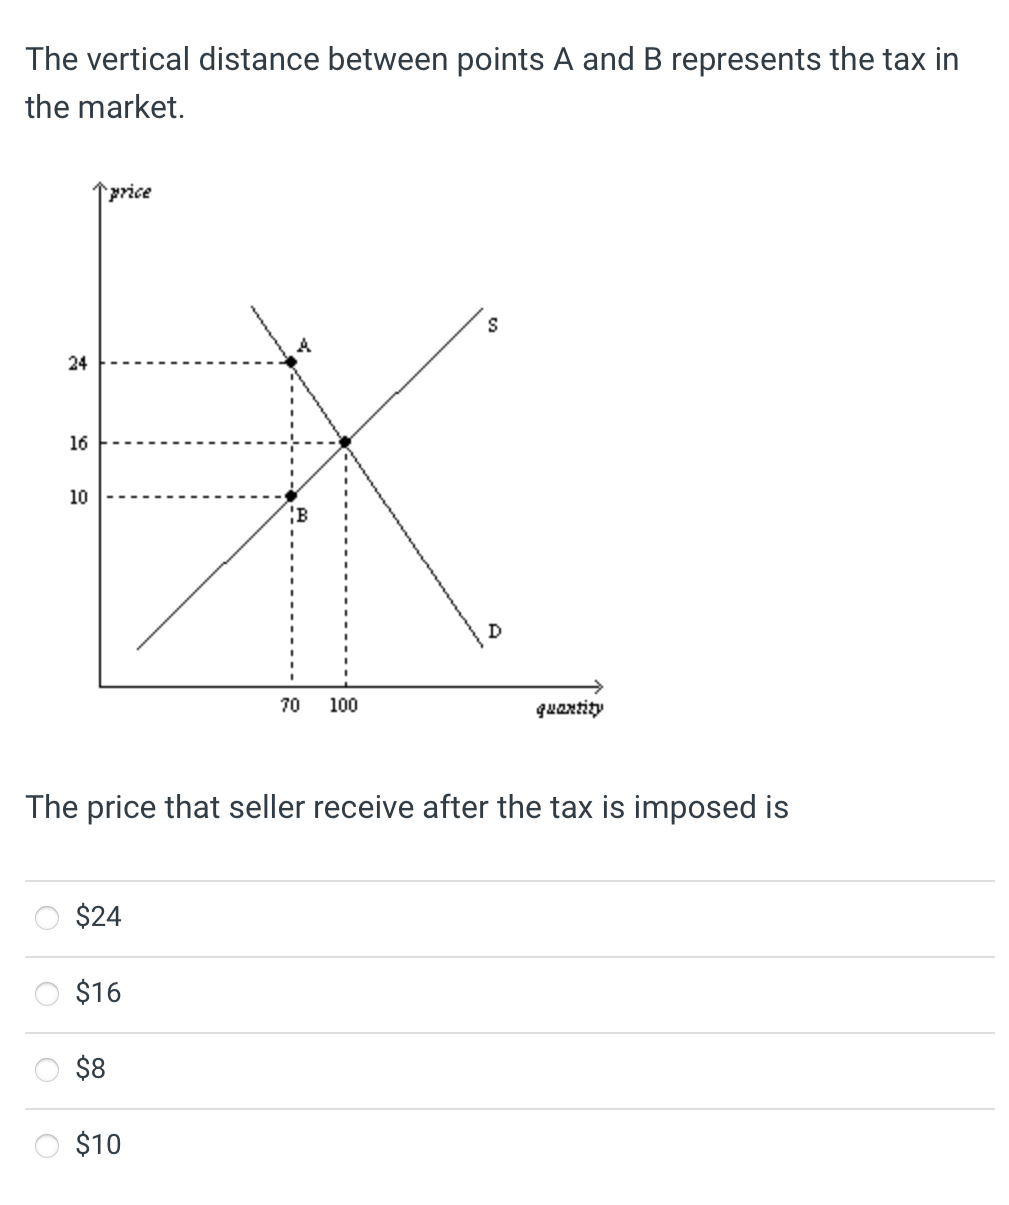 The vertical distance between points A and B represents the tax in
the market.
24
16
10
price
$24
70 100
$16
$8
$10
S
The price that seller receive after the tax is imposed is
quantity